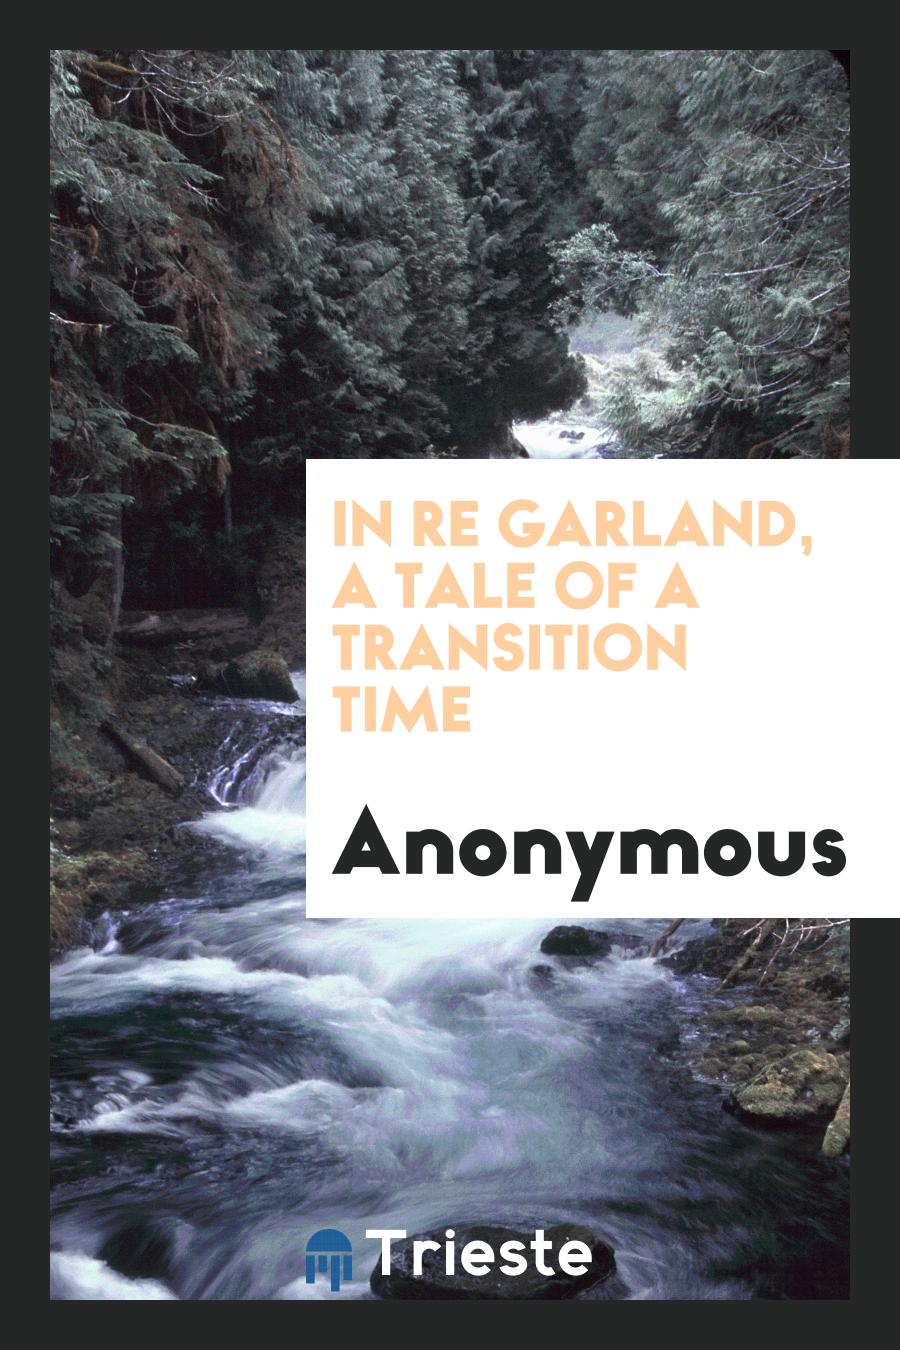 In re Garland, a Tale of a Transition Time